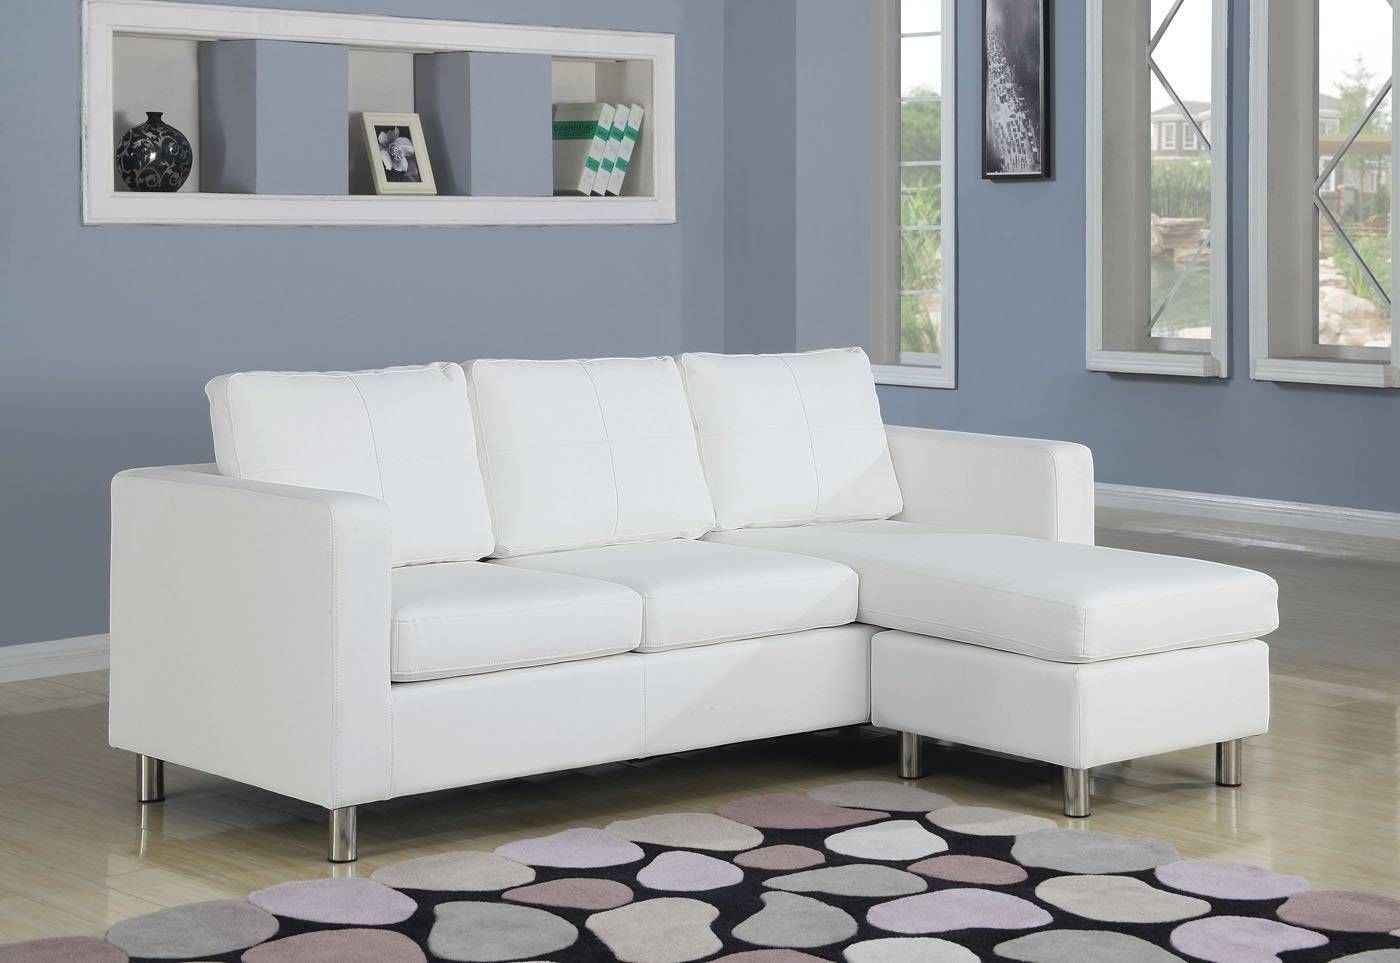 Amazing Small Sectional Sofa With Chaise Lounge 77 With Additional Within Small Modular Sectional Sofa (View 9 of 25)